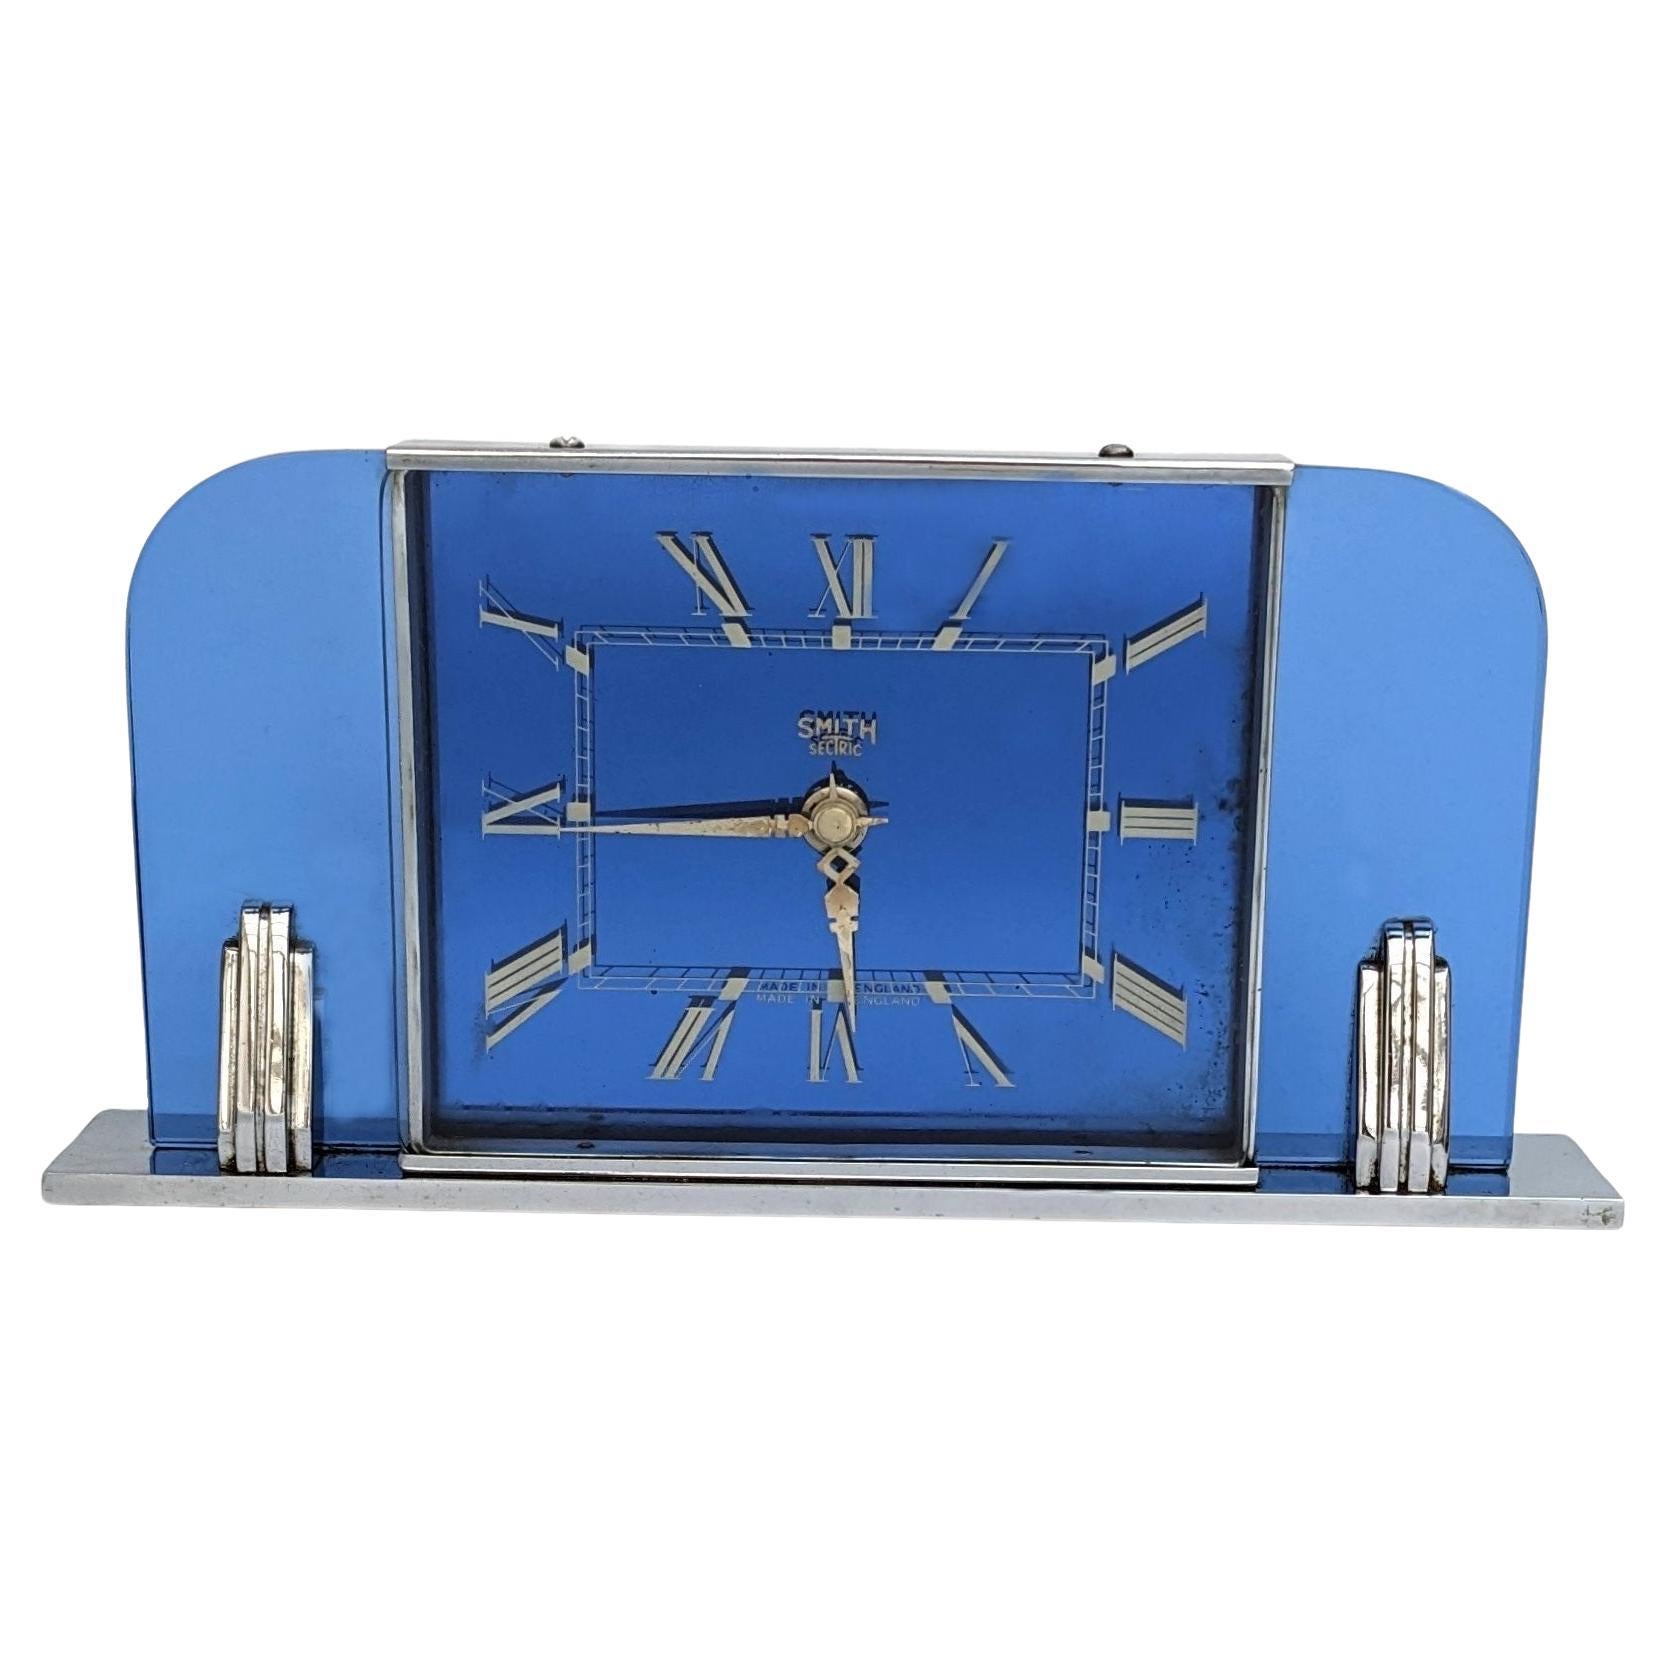 Art Deco Modernist Blue Glass Electric Clock By Smiths Clockmakers, c1930